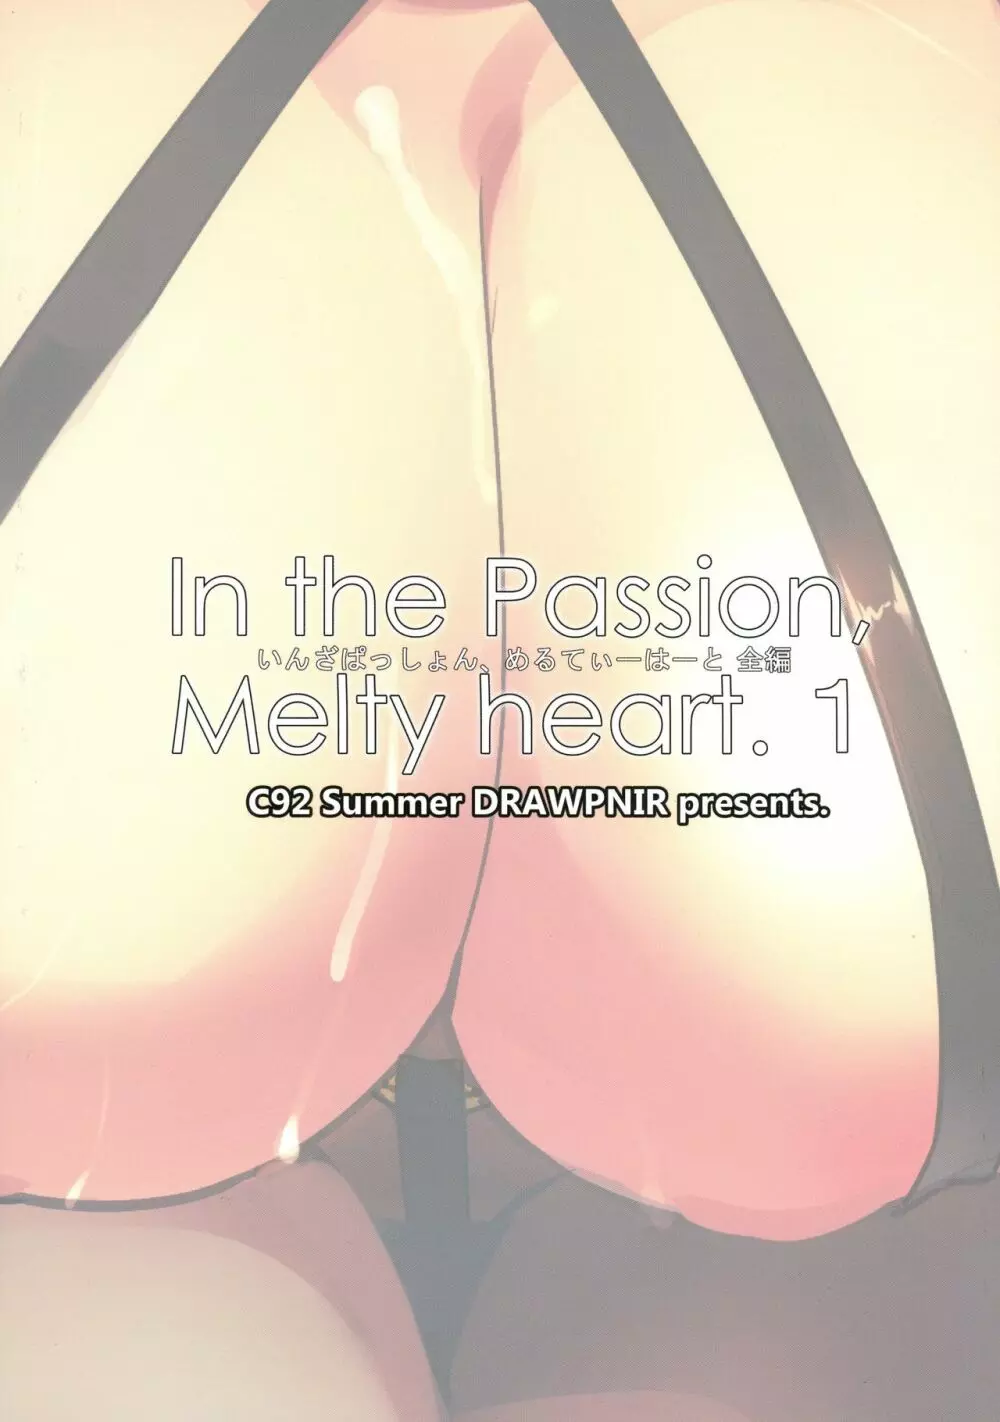 In the Passion, Melty heart. 1 - page3